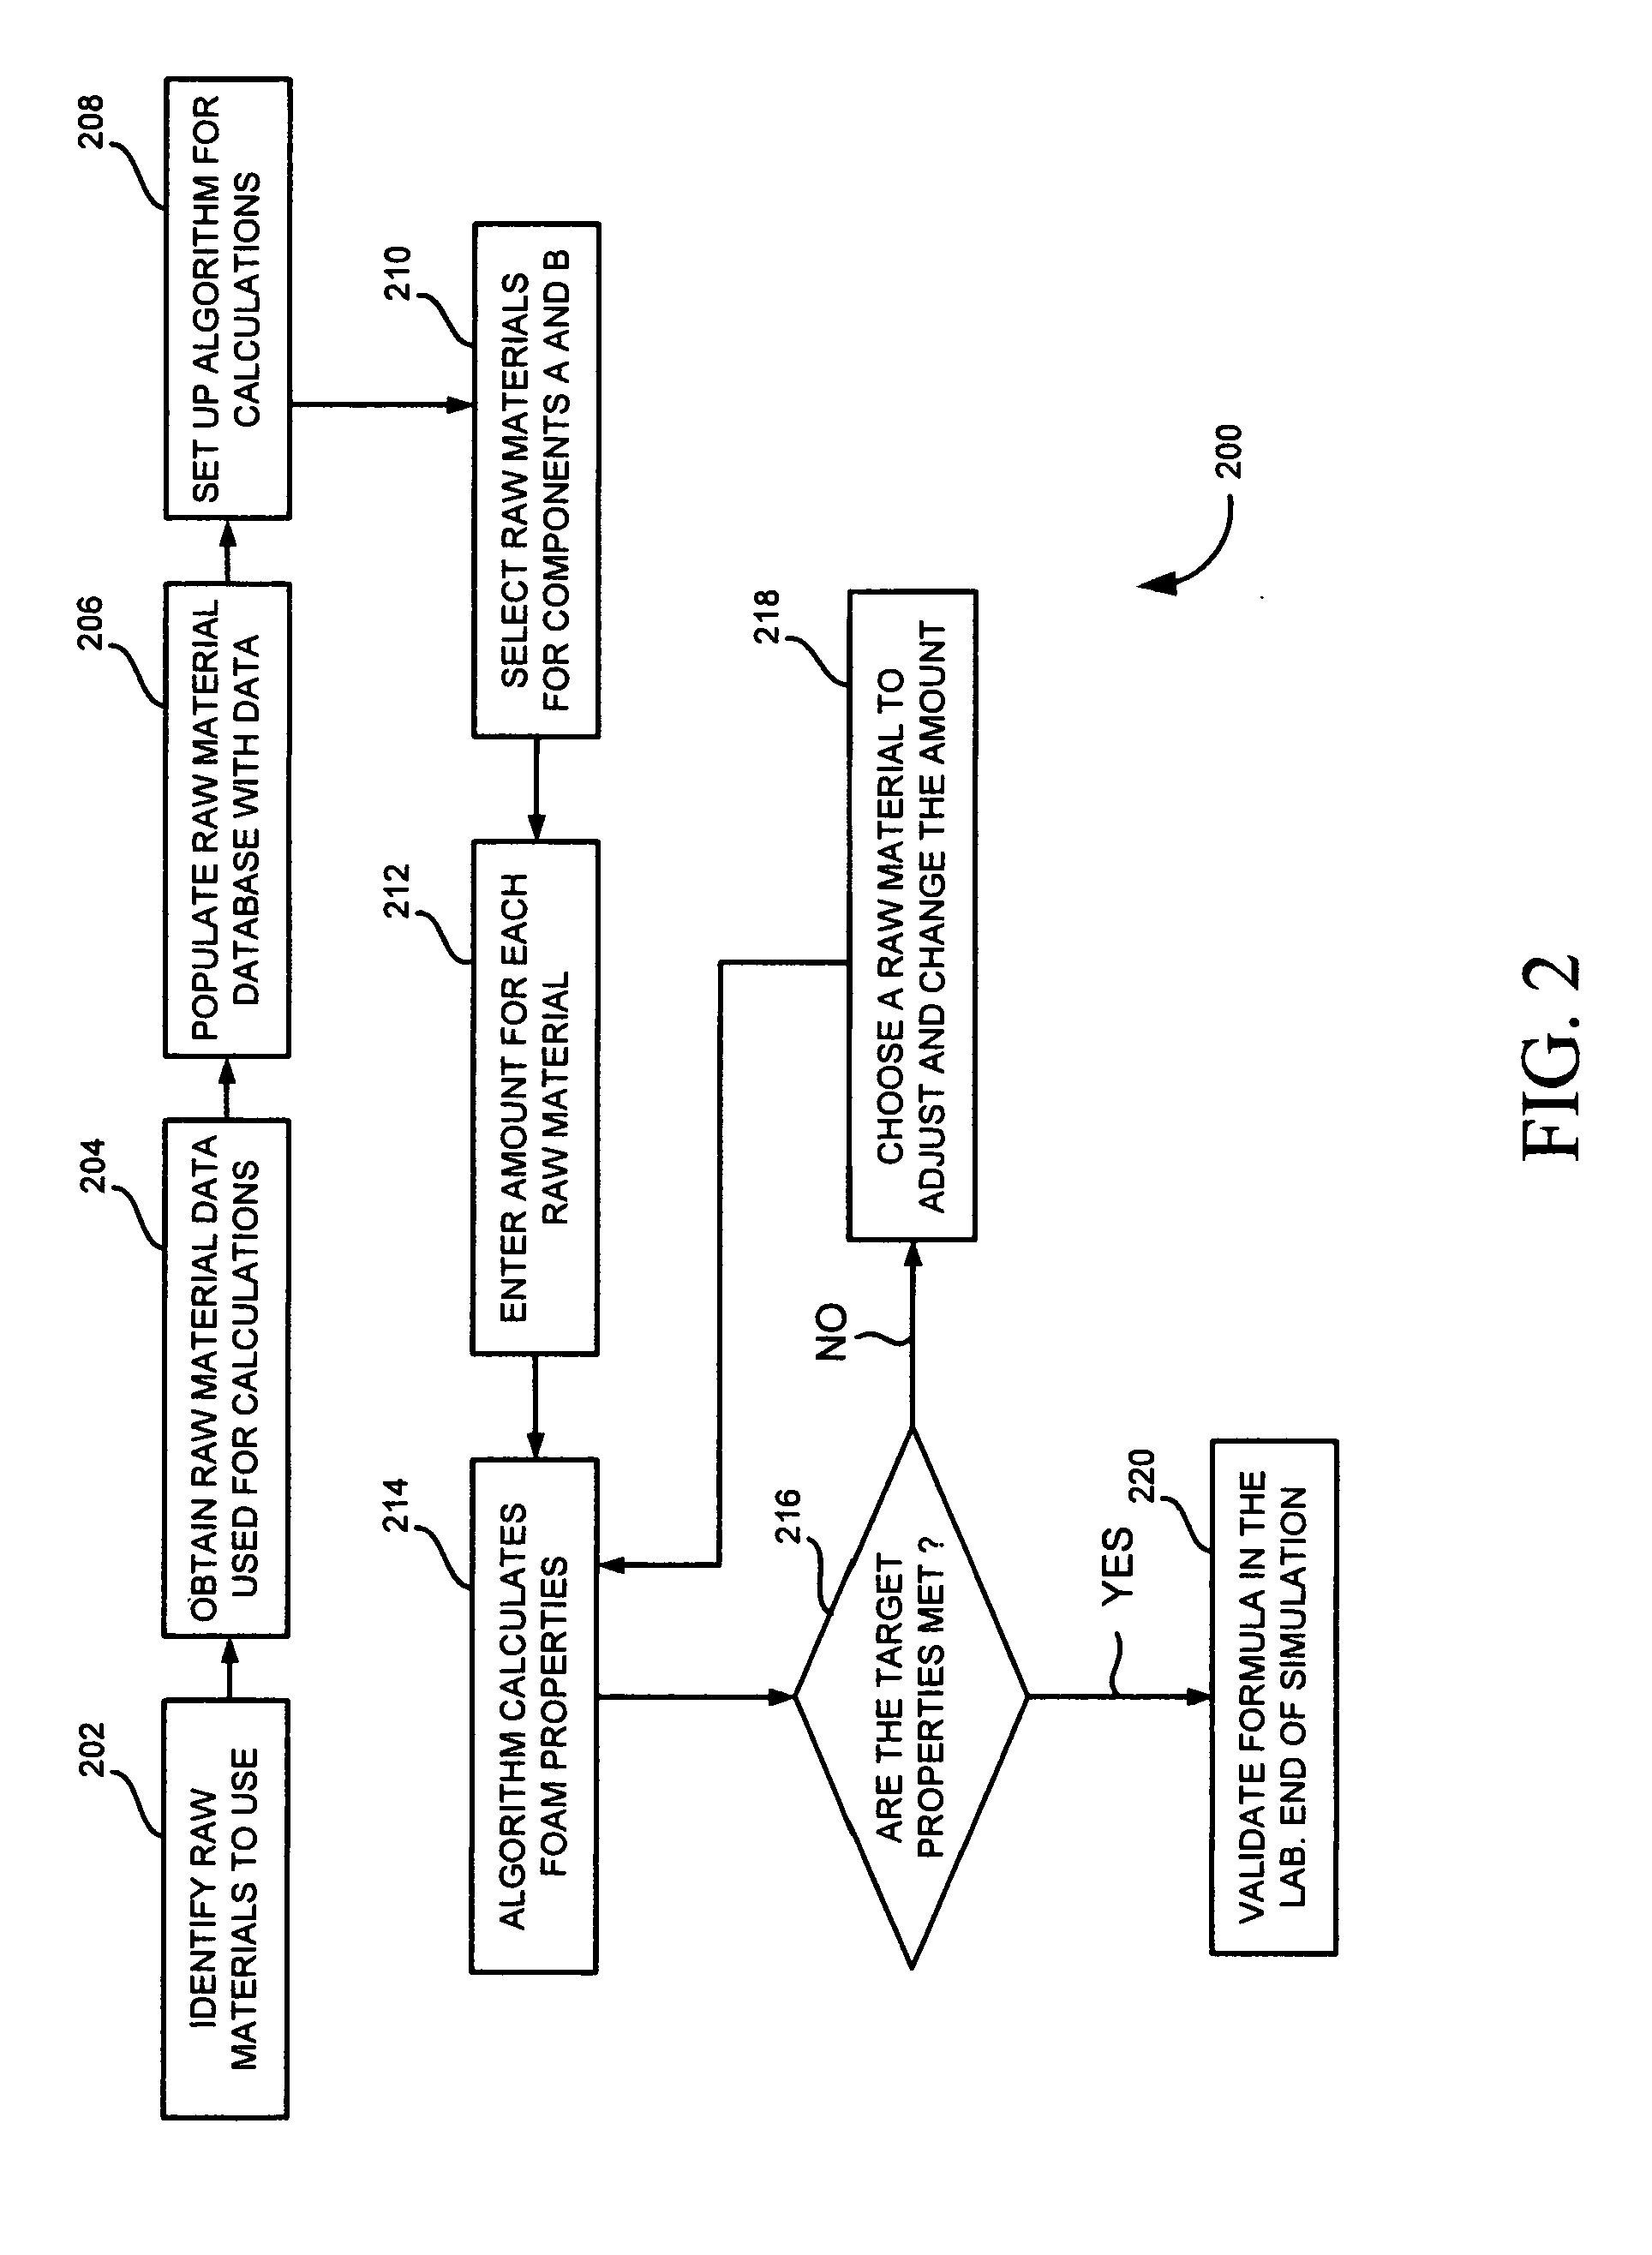 Method of predicting the physical properties of polyurethane materials